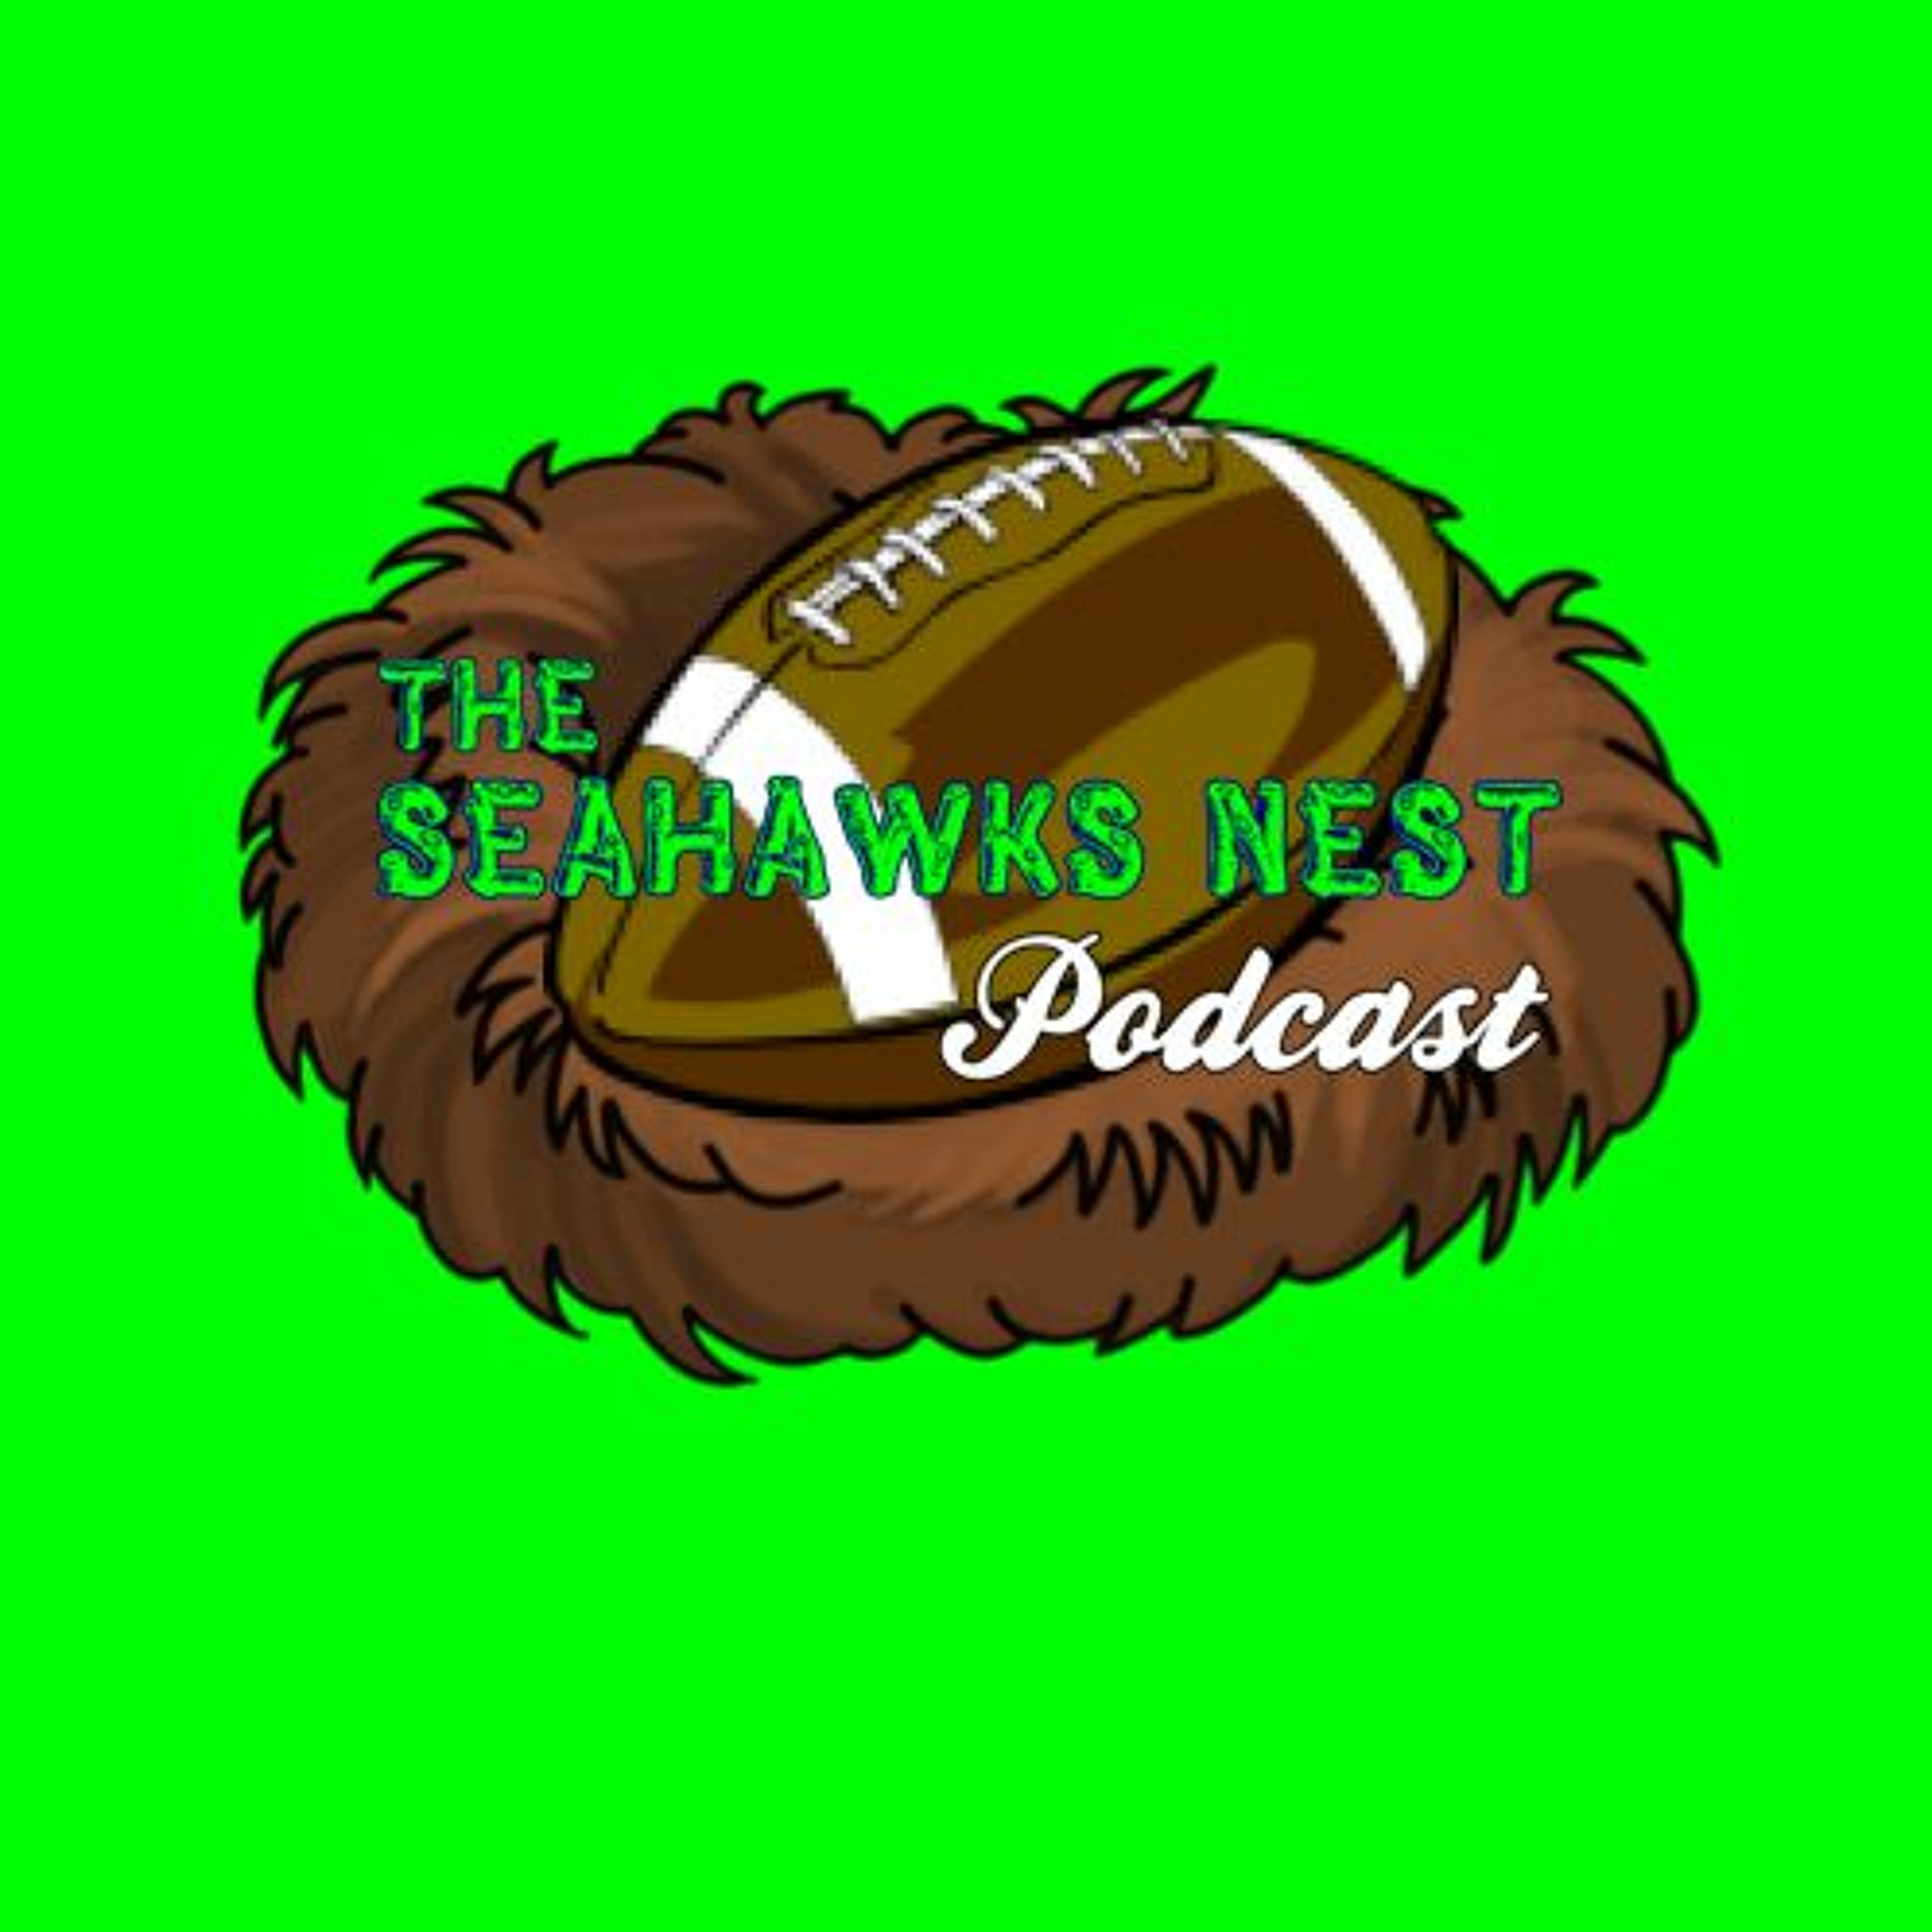 Episode 396 - Seahawks vs. the NFC South